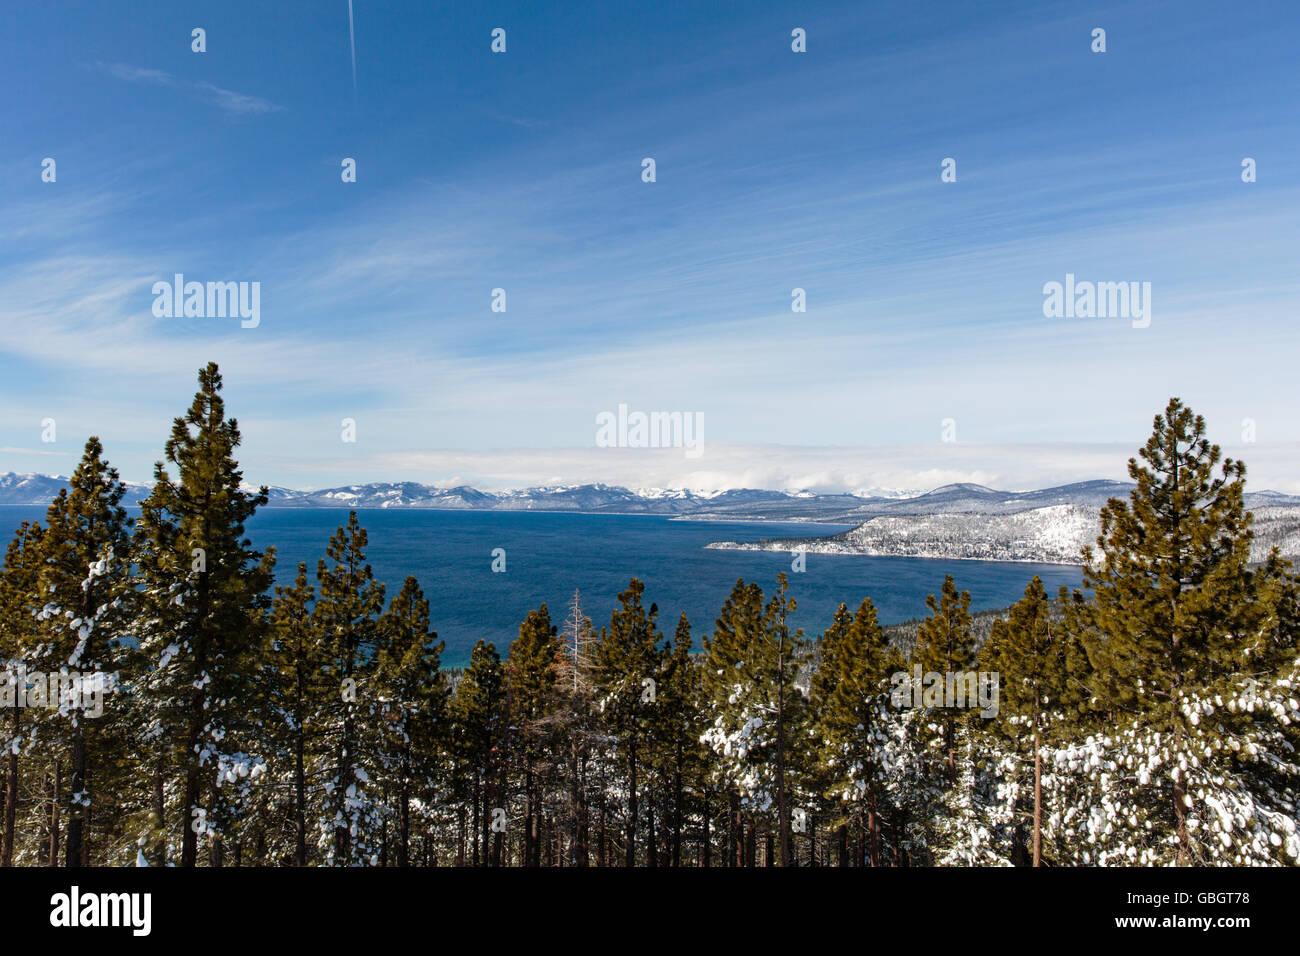 View of Lake Tahoe from the mountain Stock Photo